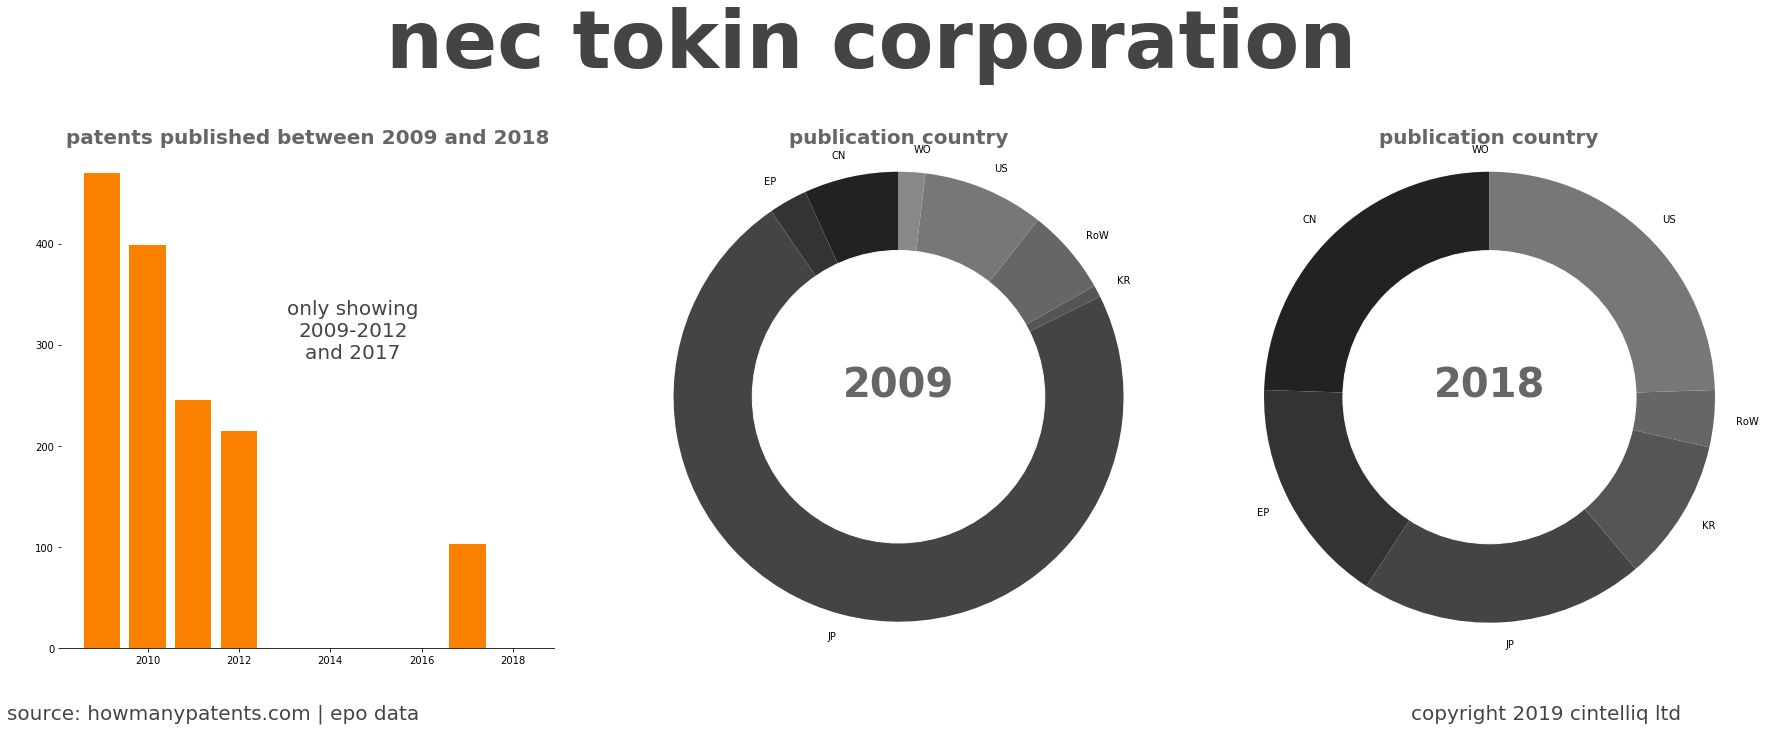 summary of patents for Nec Tokin Corporation